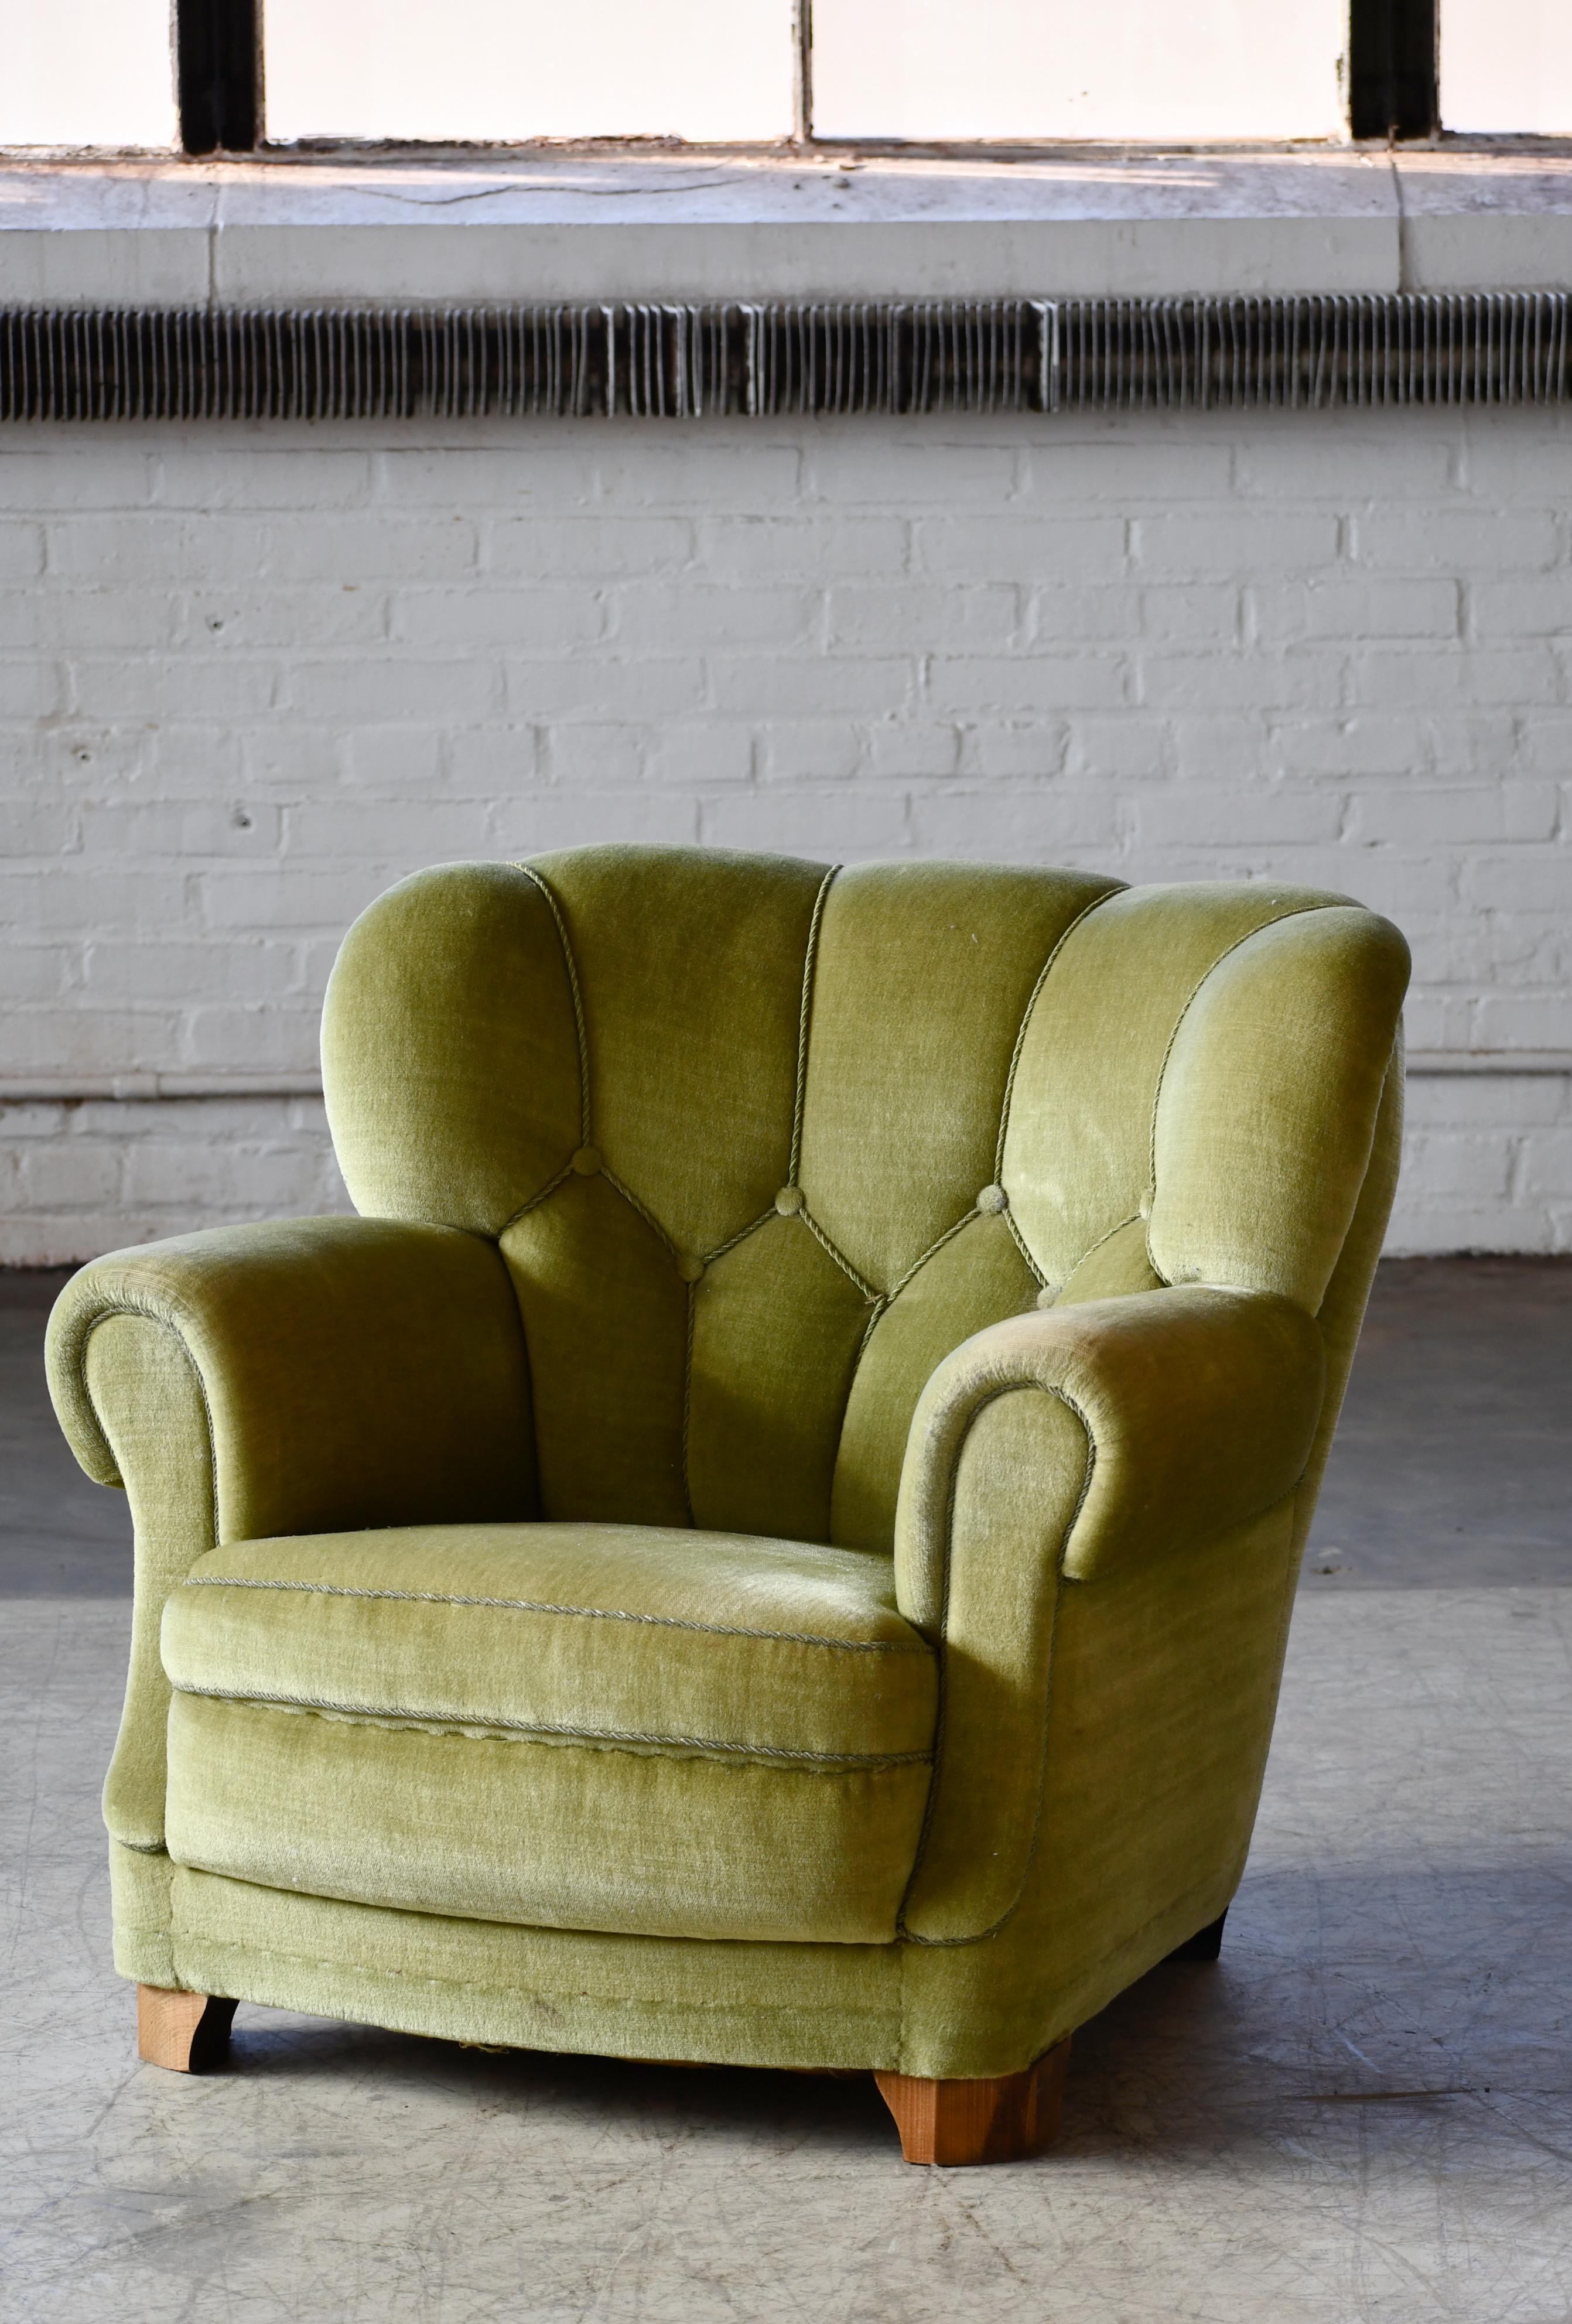 Mid-Century Modern Danish Mid-Century Lounge or Club Chair in Green Mohair, 1940's